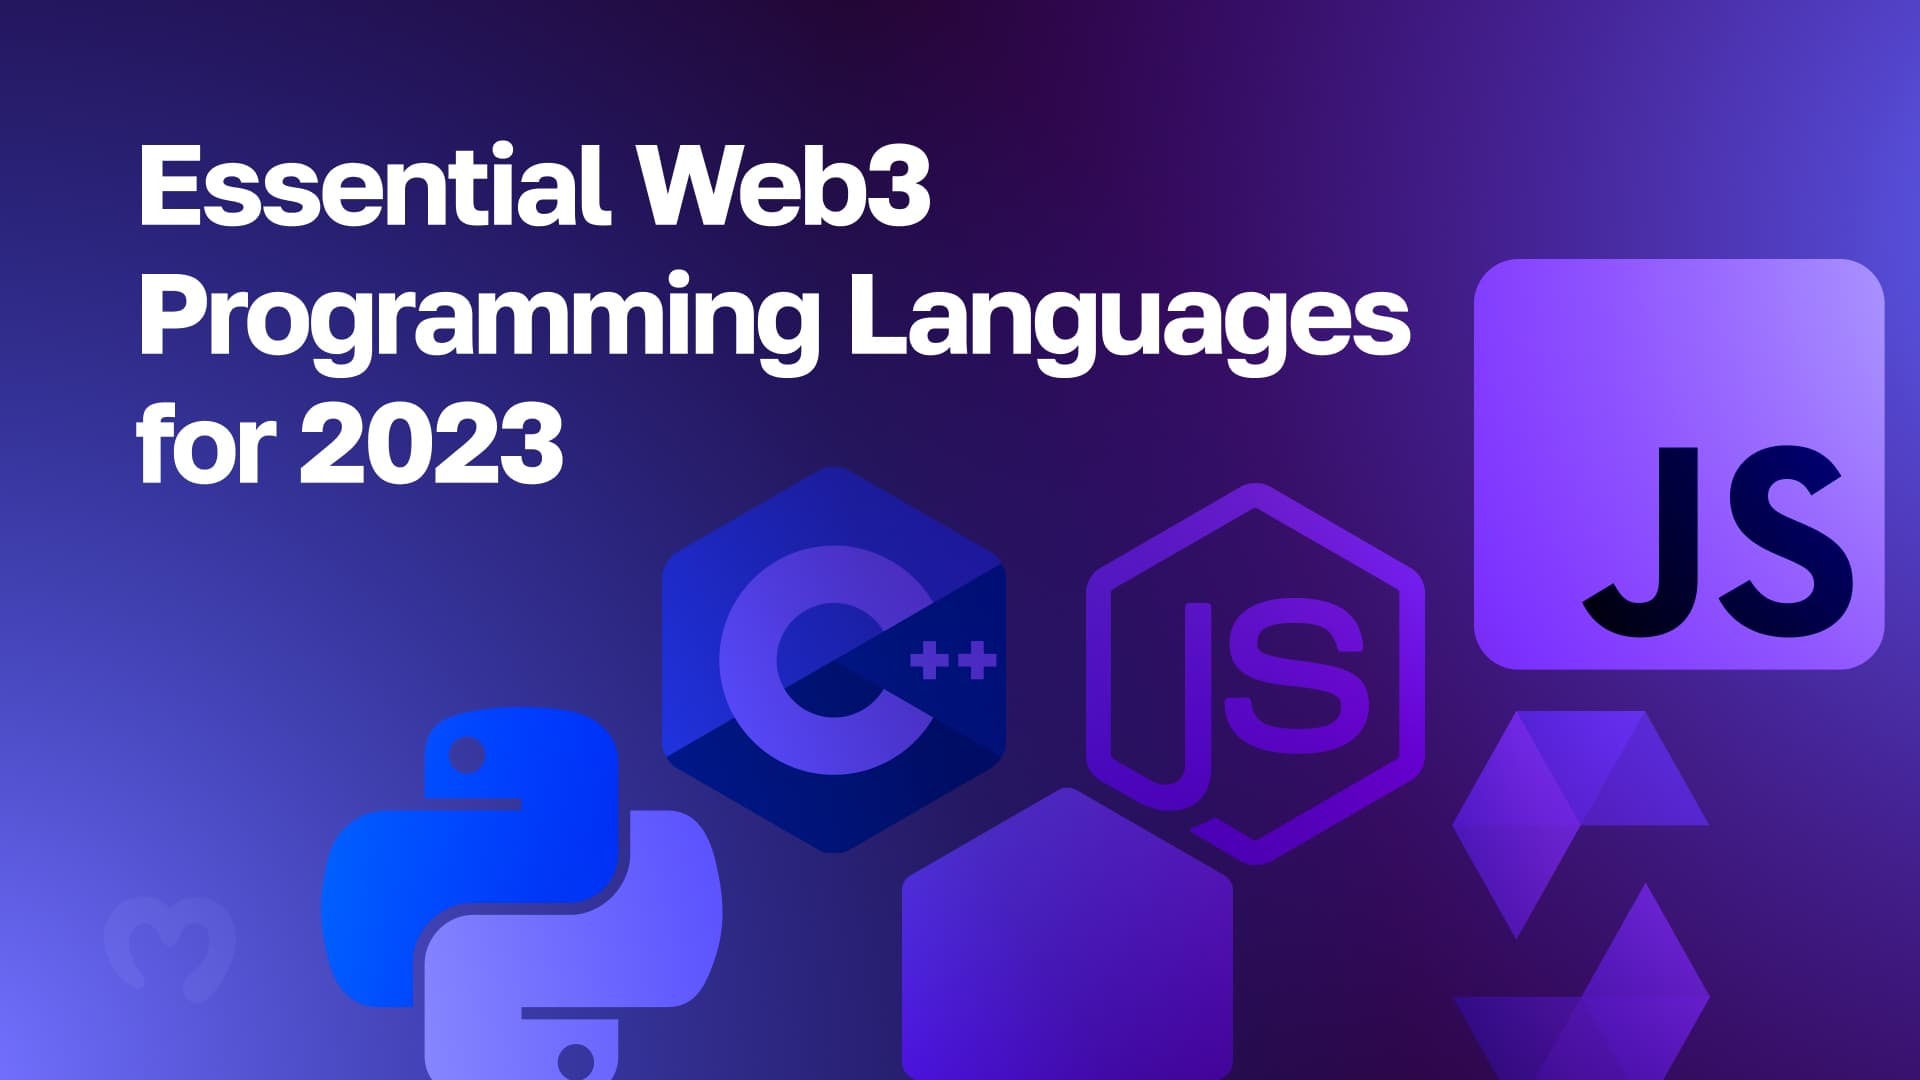 Various web3 programming languages outlined with the essential web3 programming languages for 2023 title above